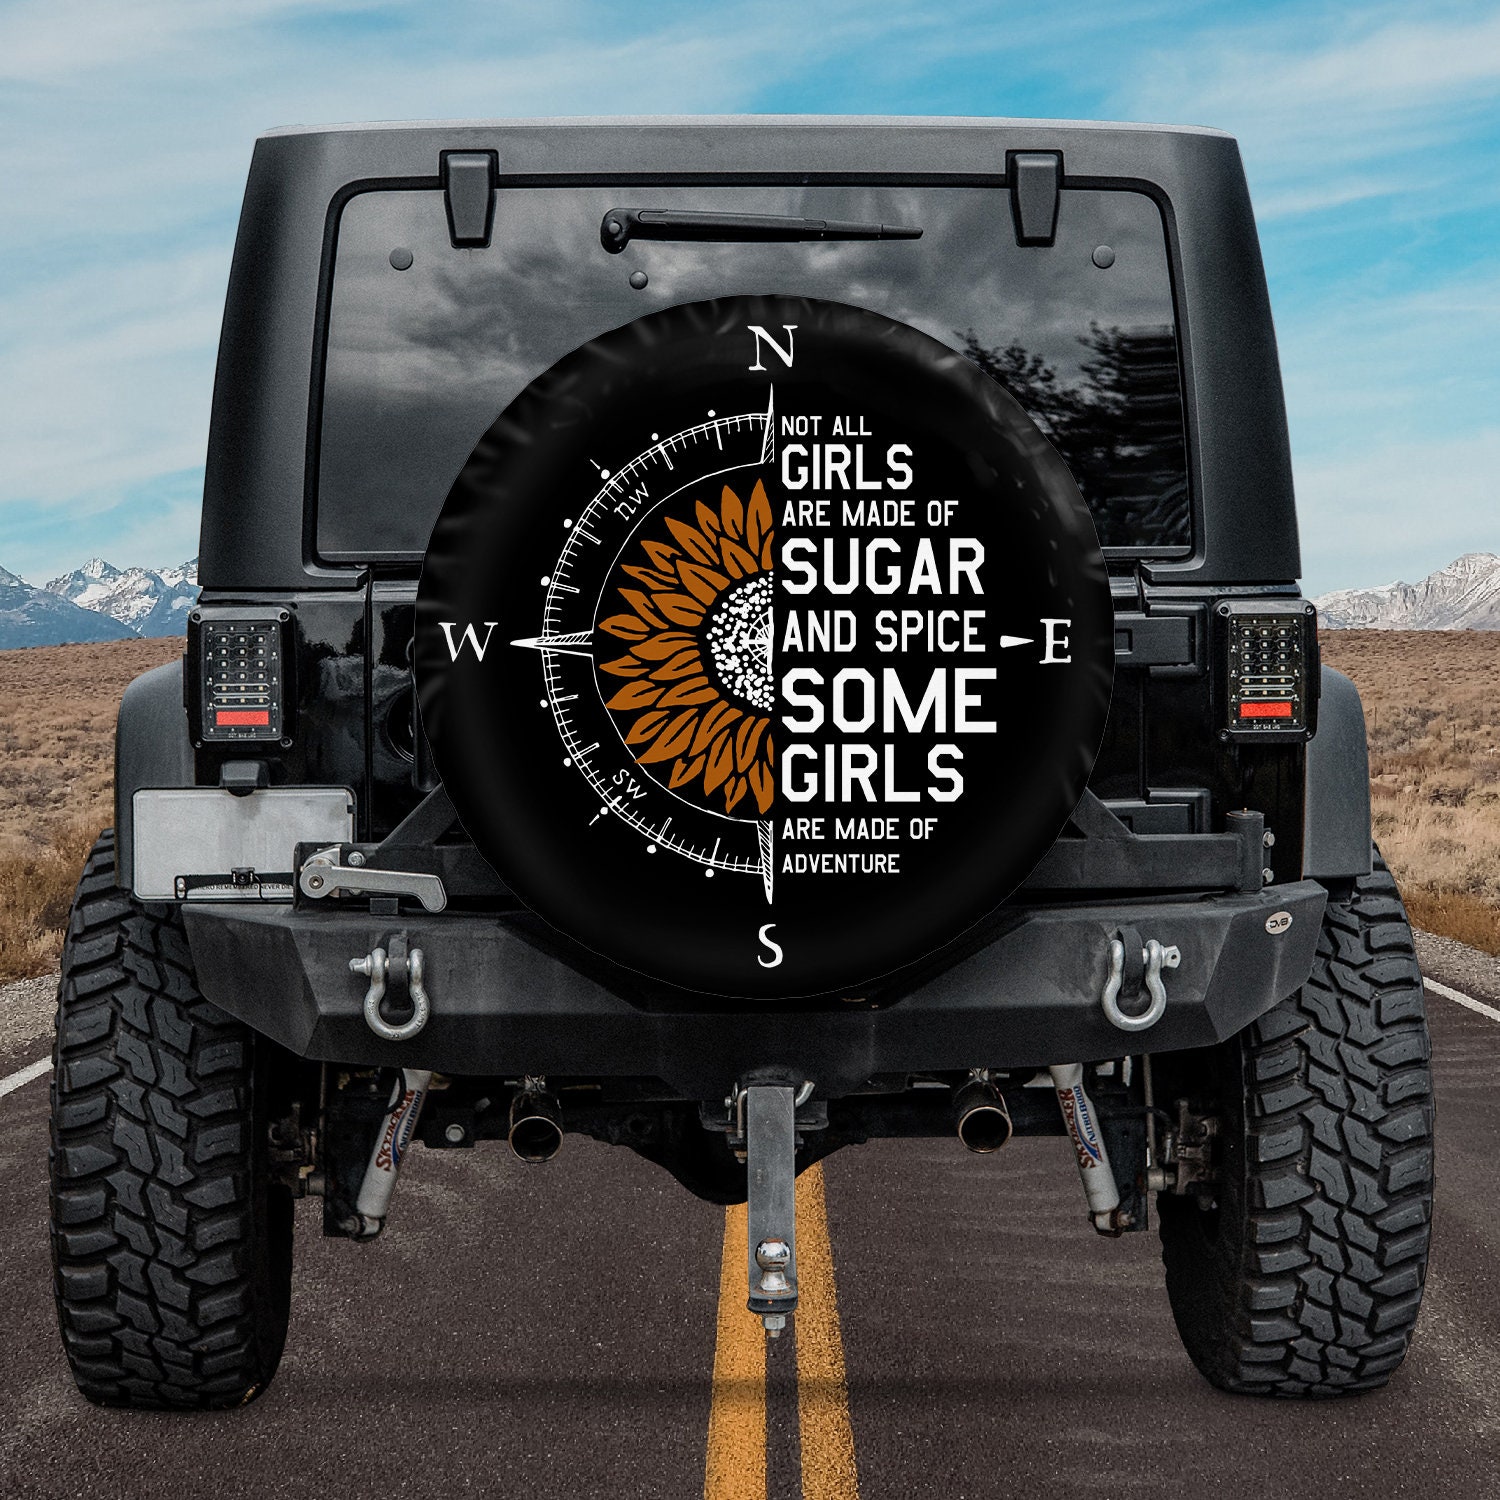 Spare Tire Cover for a Jeep Wrangler Etsy